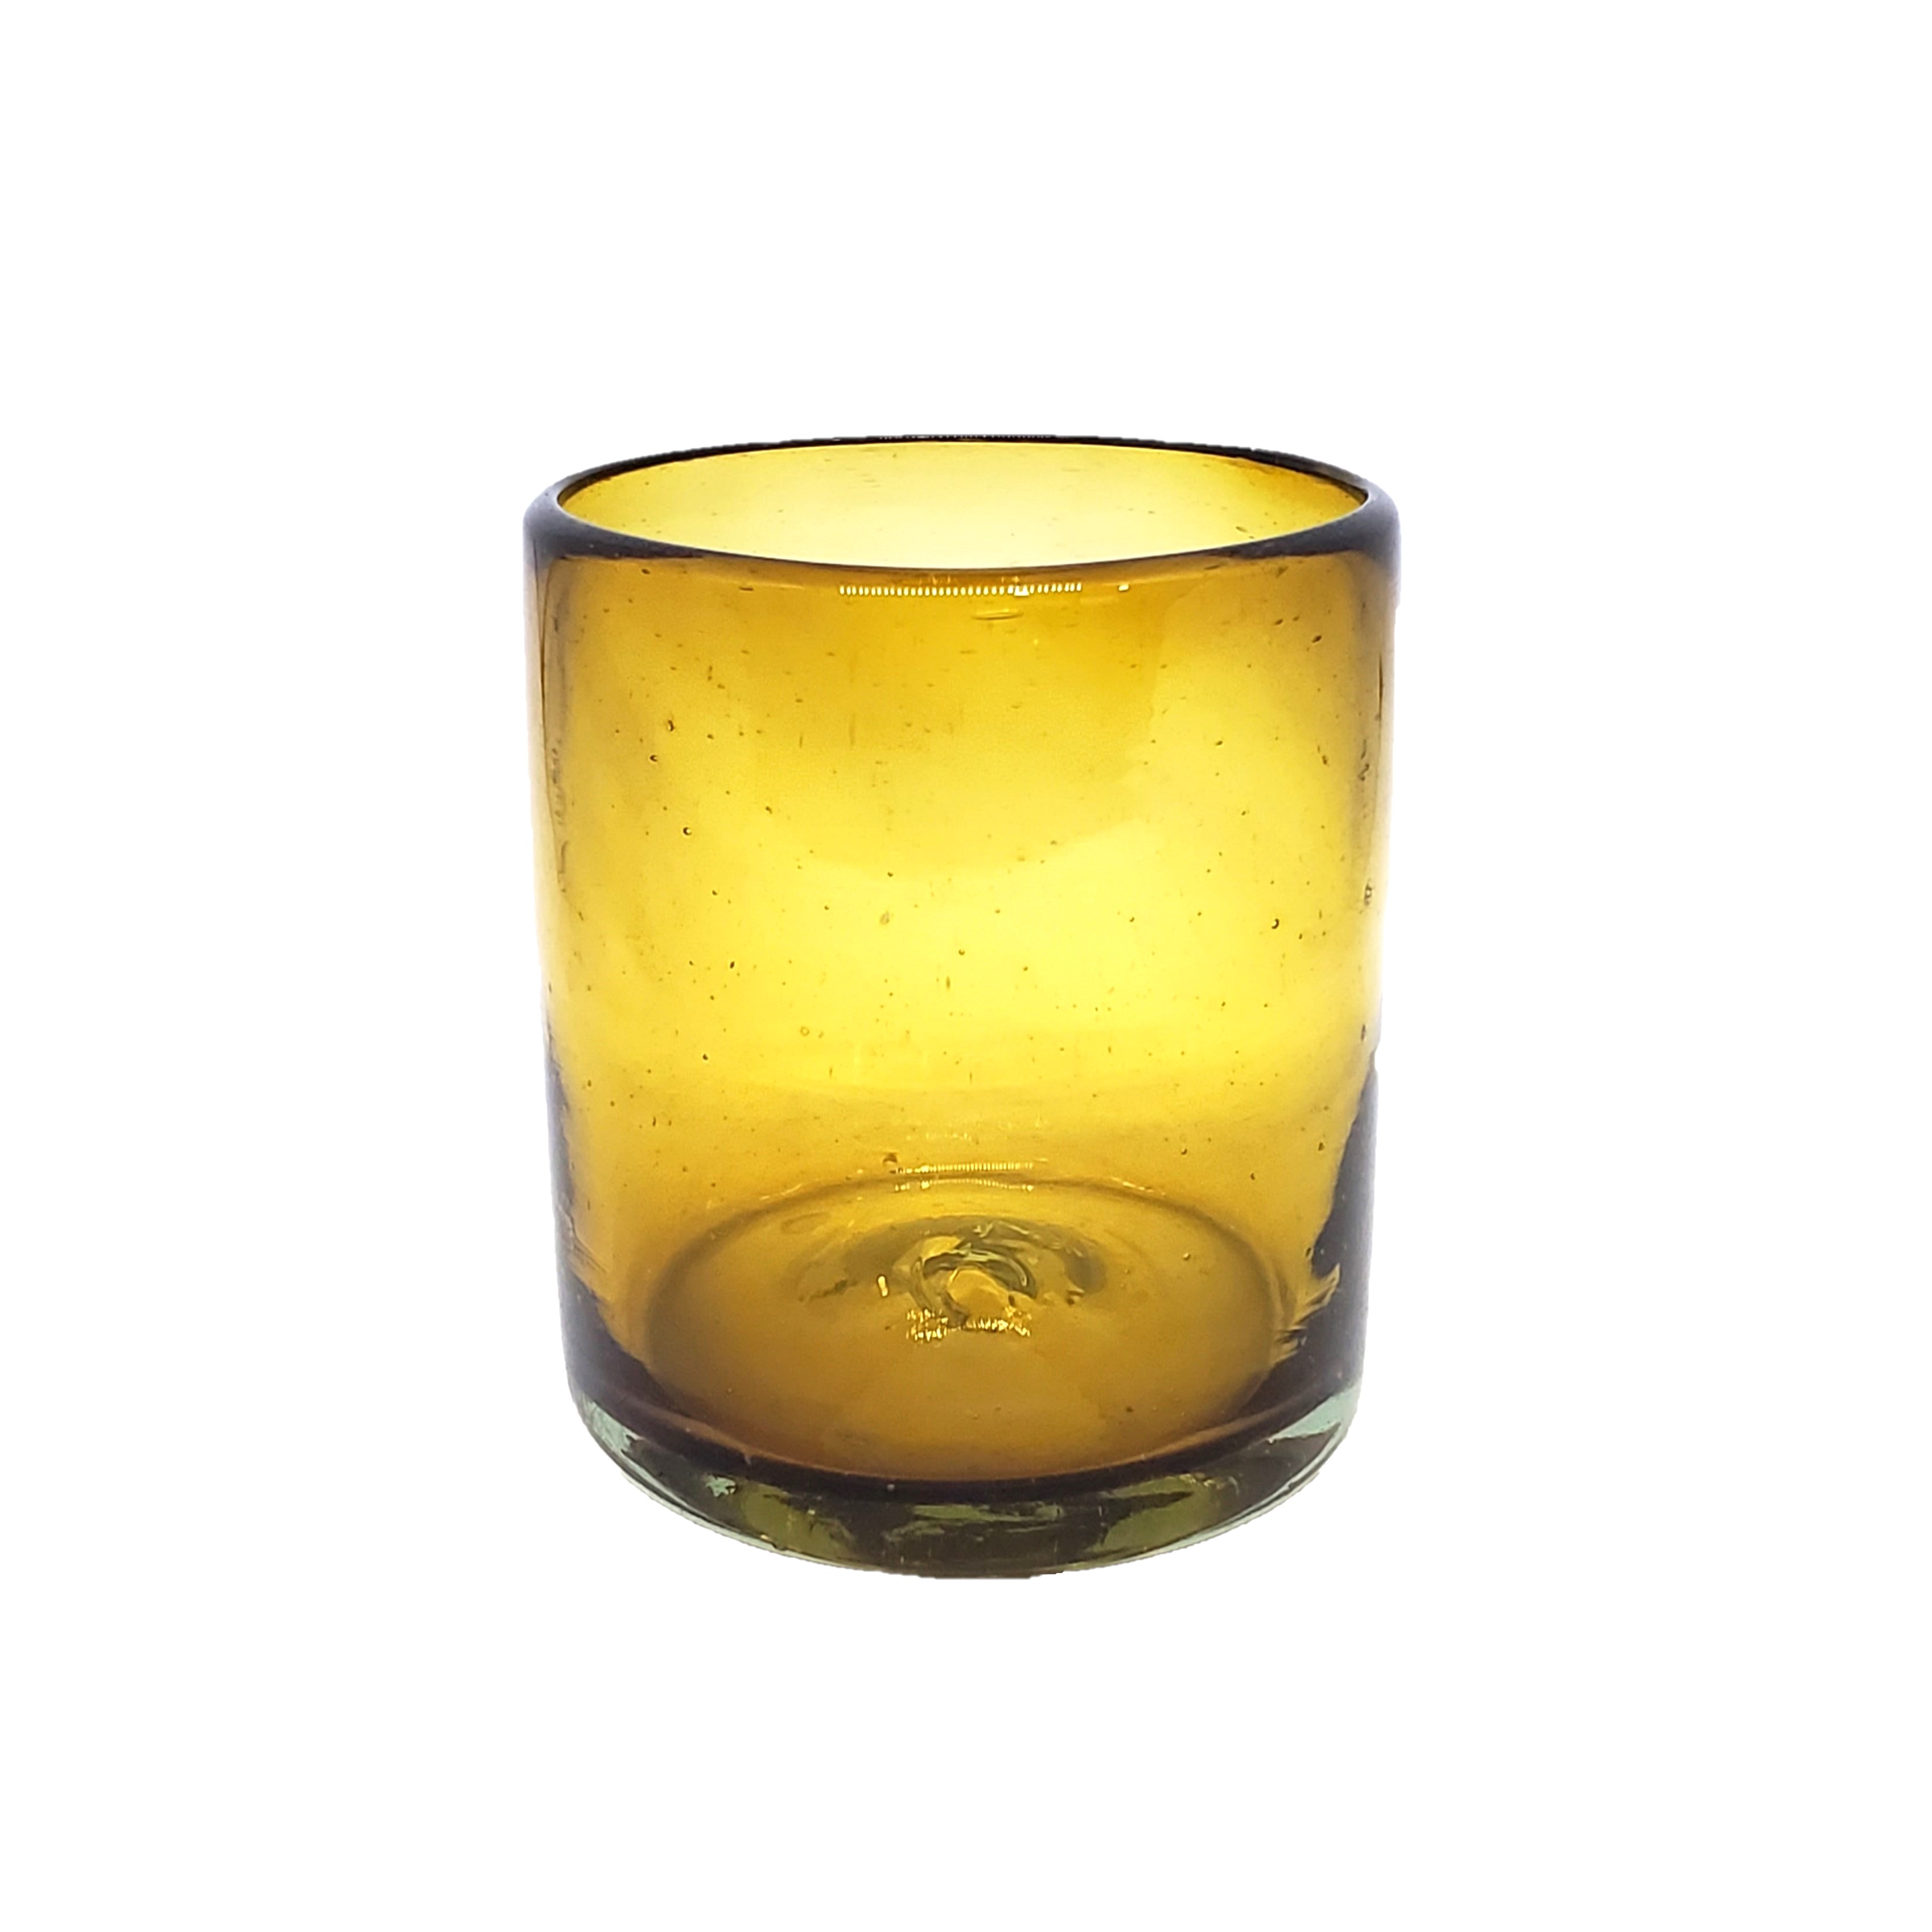 Wholesale Colored Glassware / Solid Amber 9 oz Short Tumblers  / Enhance your favorite drink with these colorful handcrafted glasses.